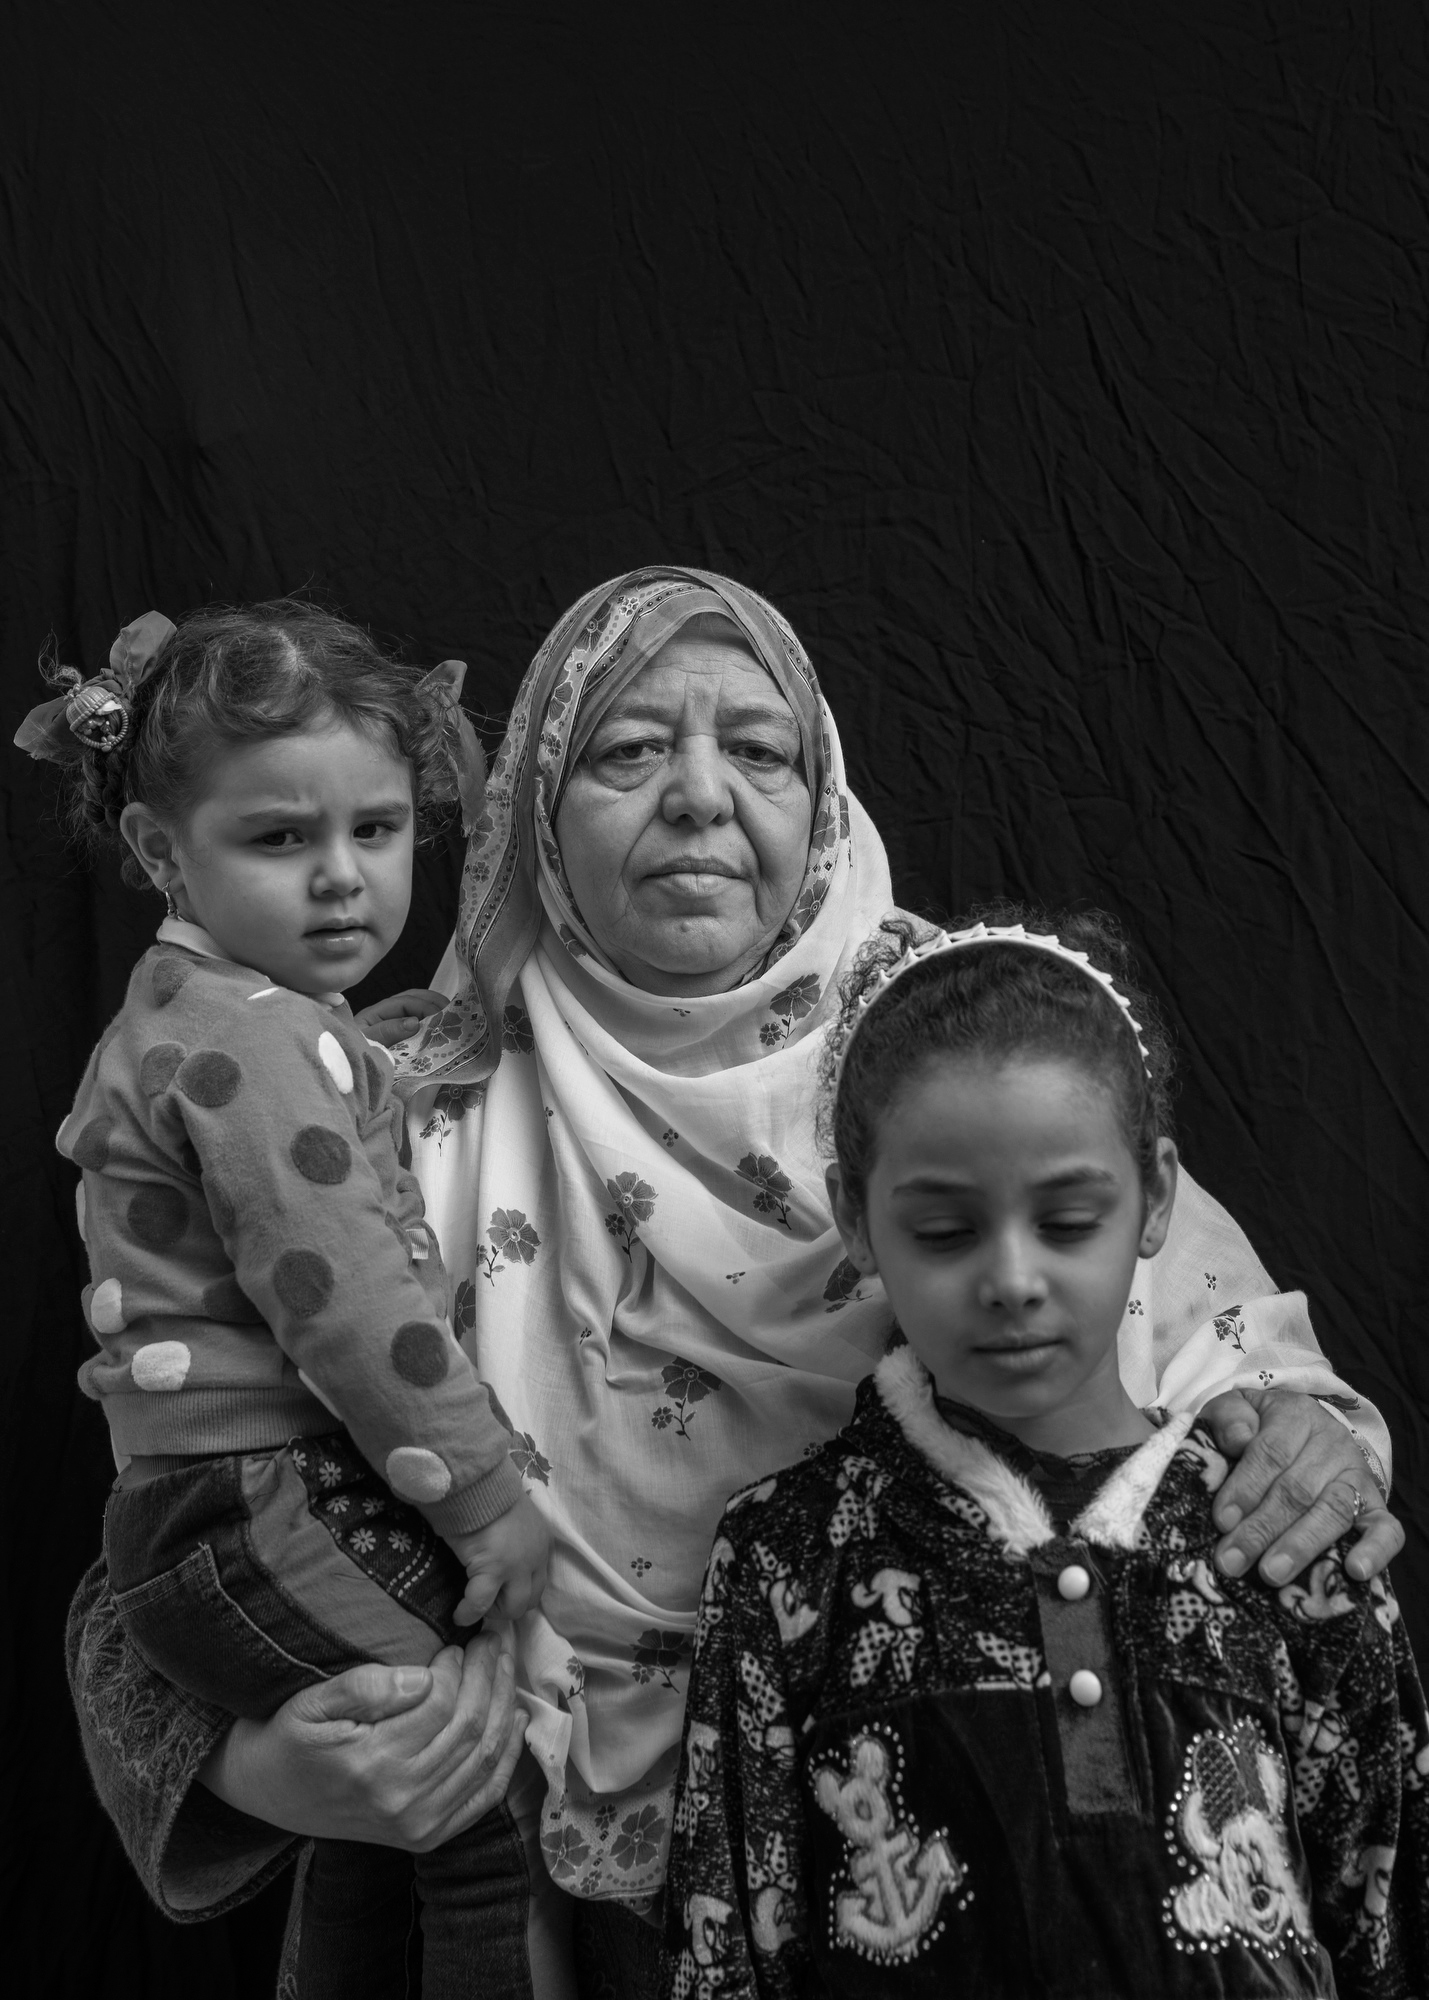 Hawla Mahdi Salah, 67, poses for a portrait with her granddaughters Safae Khalid Adnan, 2, and Hawla Khalid Adnan, 9, in Mosul, Iraq. On June 26, 2017, an airstrike destroyed their home while they were inside. Salah lost nine family members in the blast, including two sons and three grandchildren, leaving her to care for Safae and Hawla who were orphaned, along with six other grandchildren. “Only Allah knows if the Old City will be rebuilt," she says. (Victor J. Blue)